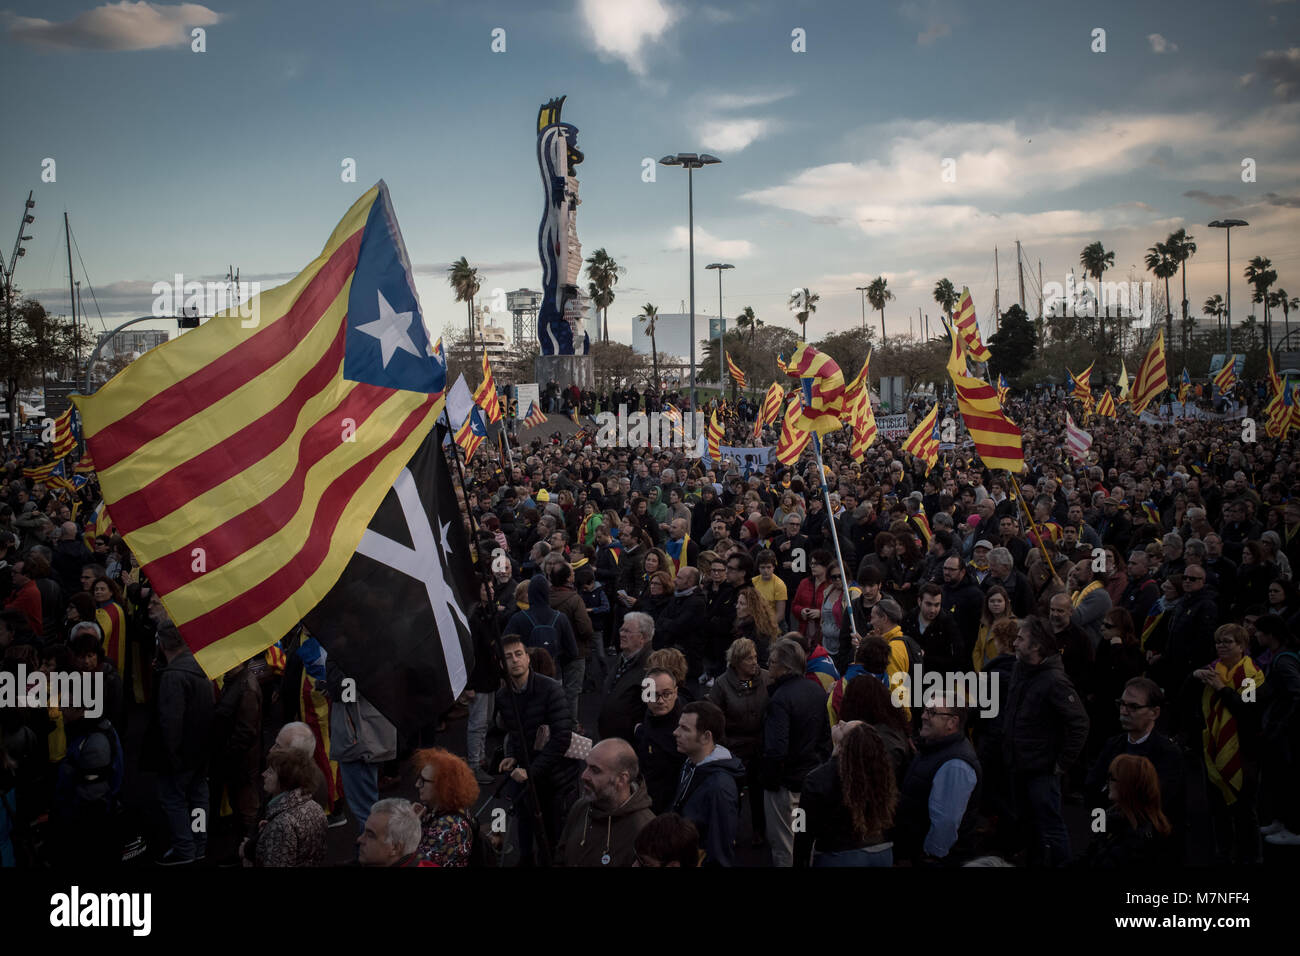 Barcelona, Catalonia, Spain. 11 March, 2018. Thousands demonstrate in Barcelona streets demanding the implementation of the Independent Catalan Republic (not deployed due to the Spanish government intervention) following  the past results of the referendum on first October  and the autonomic election held on 21 December in which the pro-independence parties got an absolute majority. Credit:  Jordi Boixareu/Alamy Live News Stock Photo